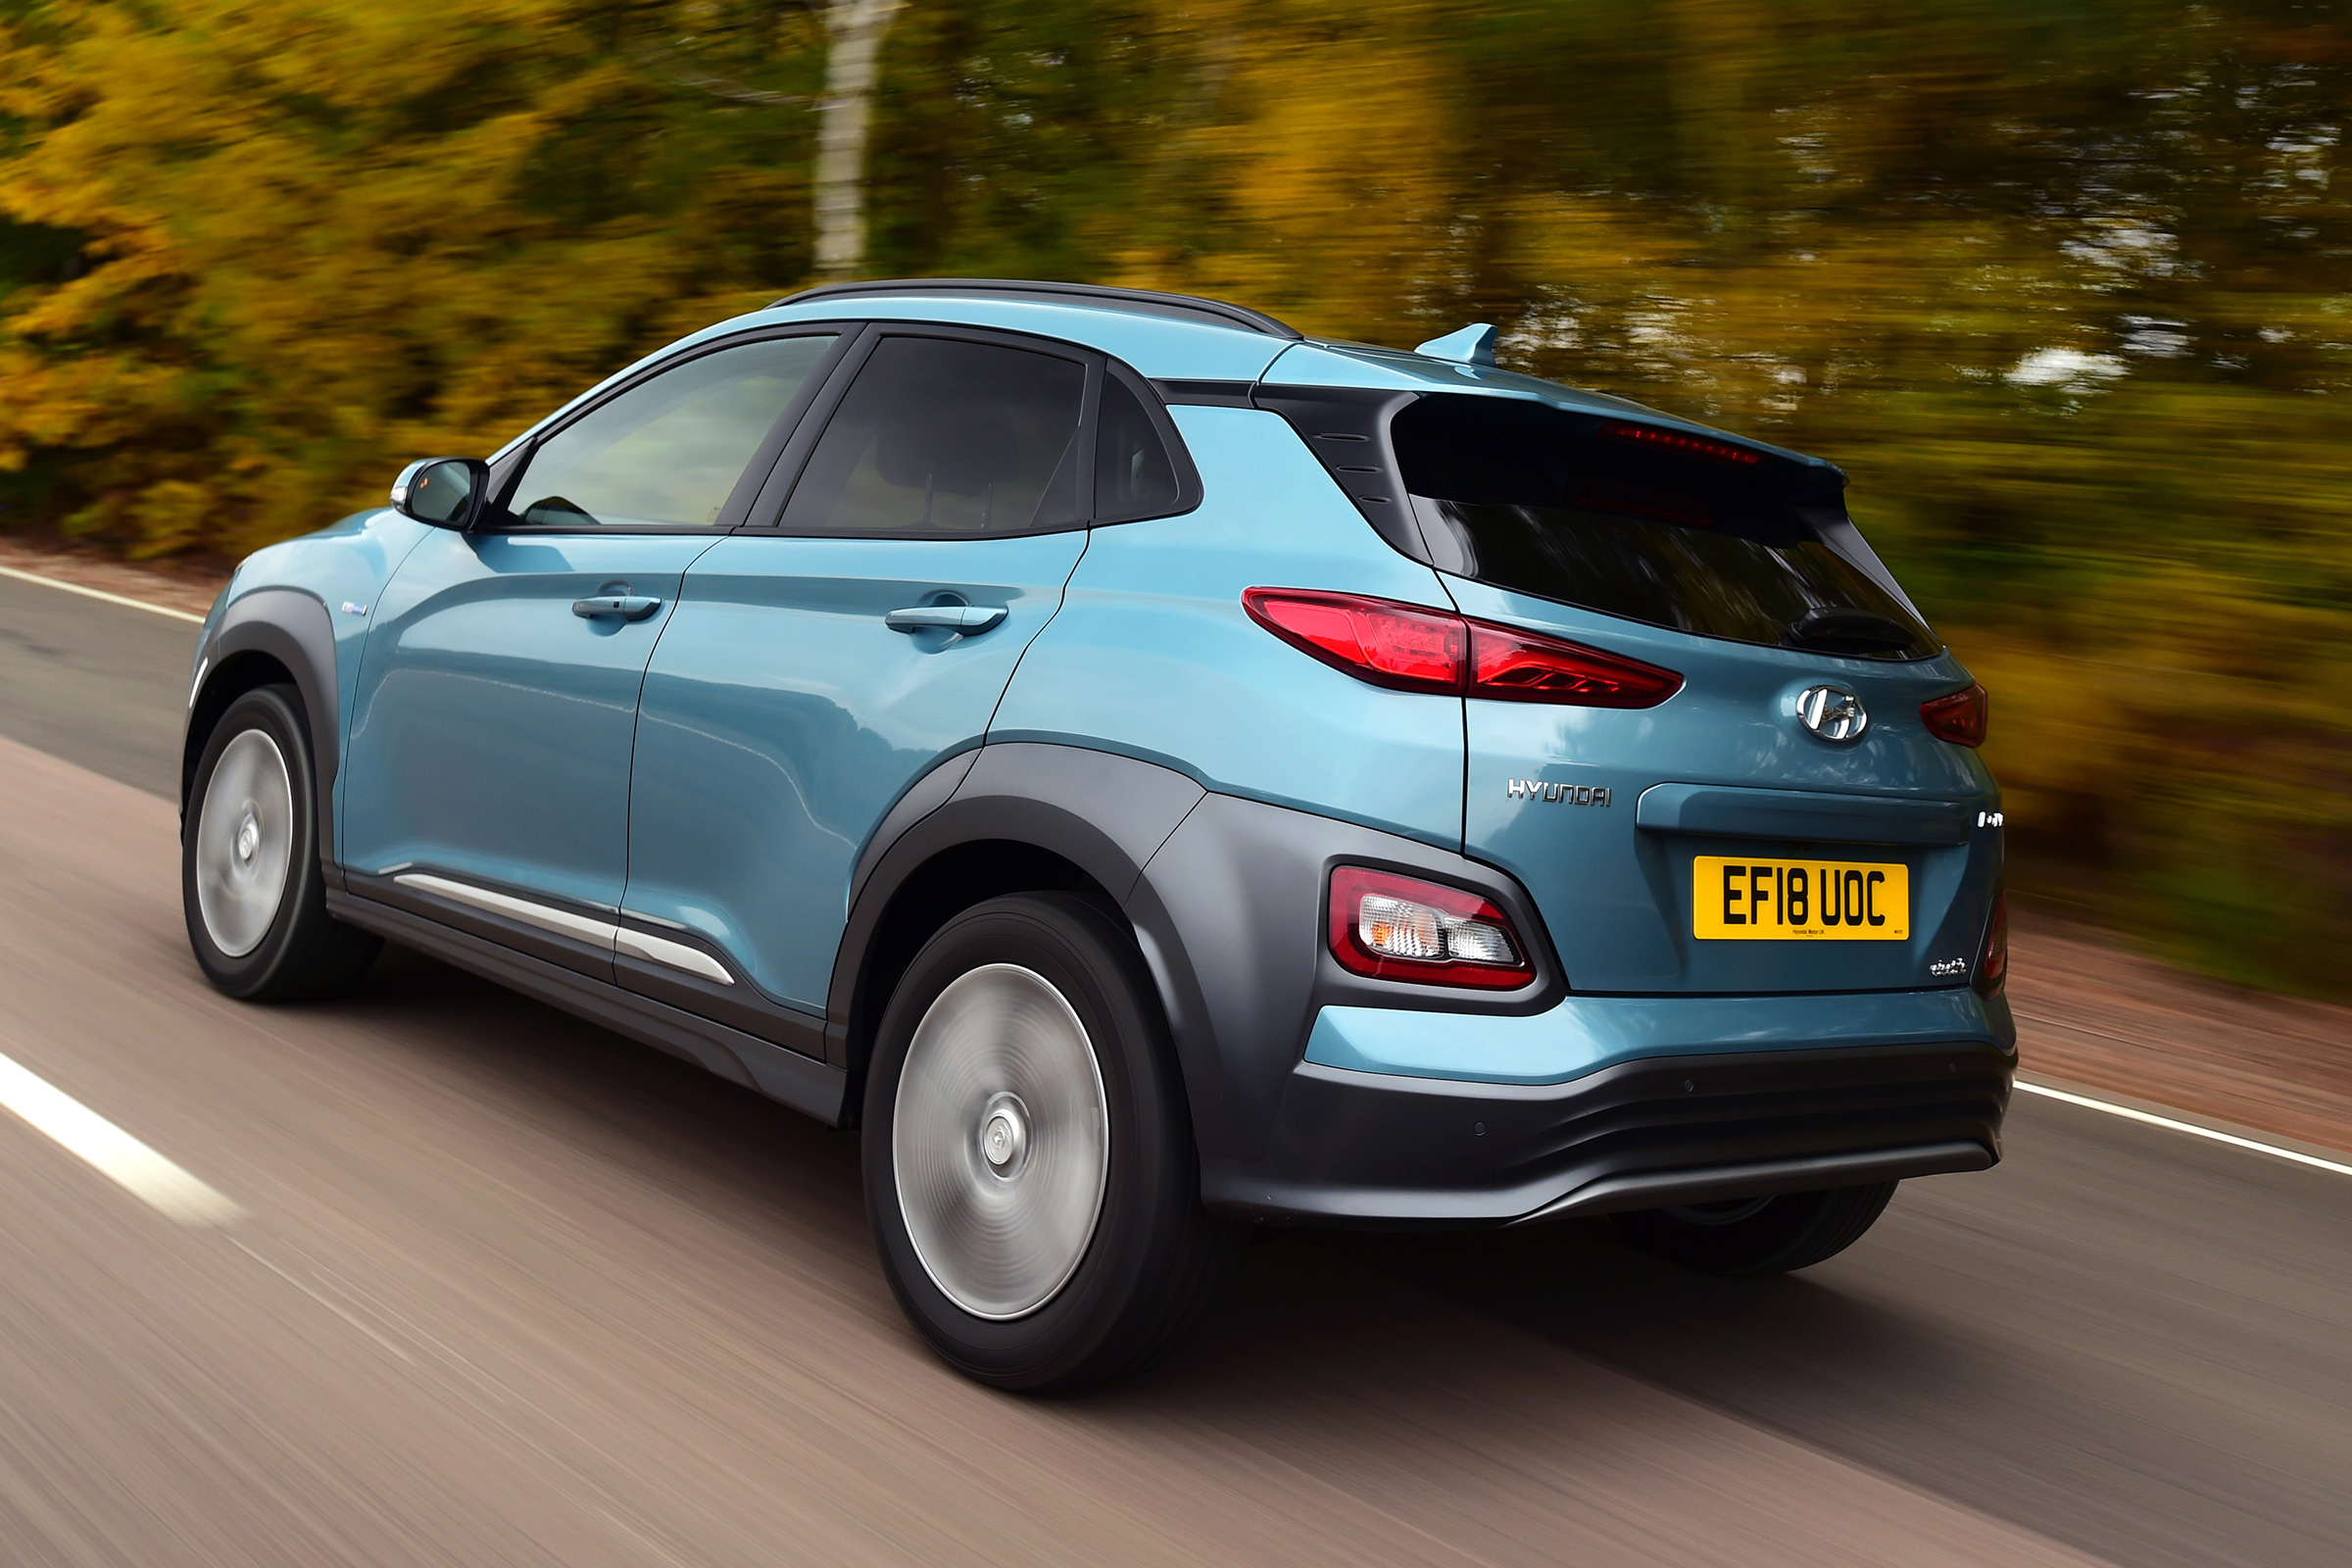 Comparison of the Hyundai Kona Electric and the Nissan Leaf